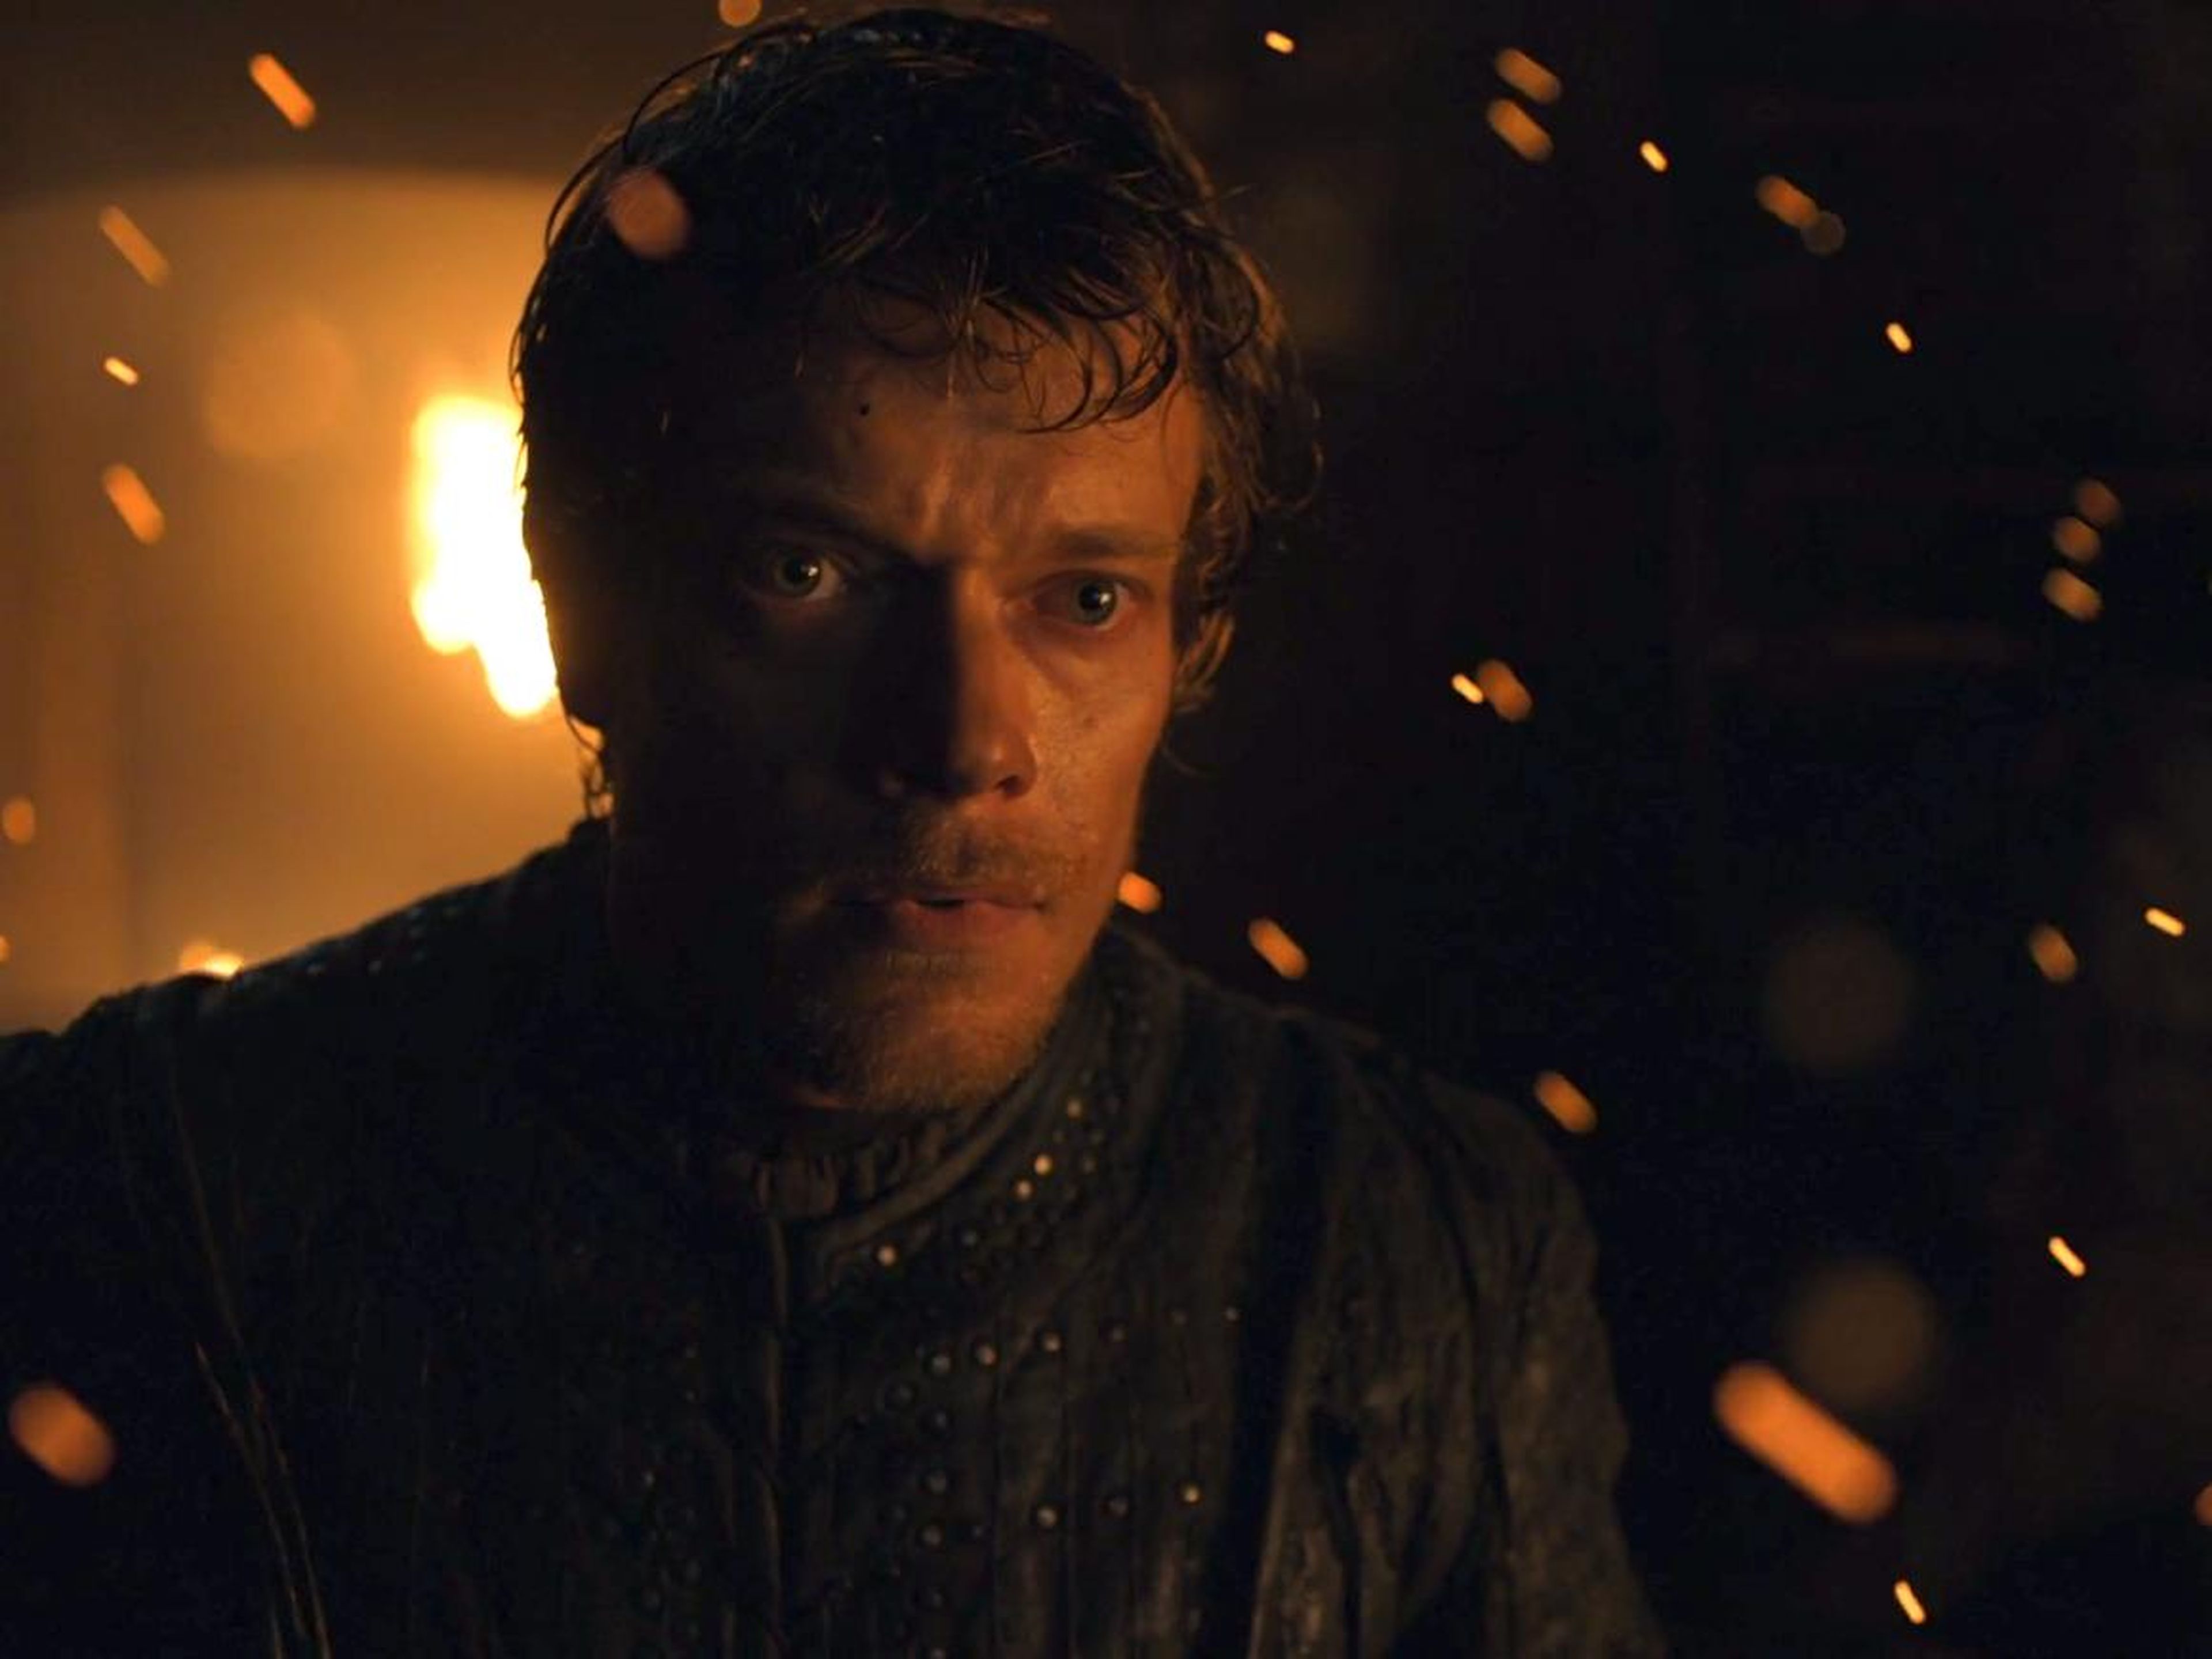 Theon couldn't make good on his earlier promise to protect his sister against harm.